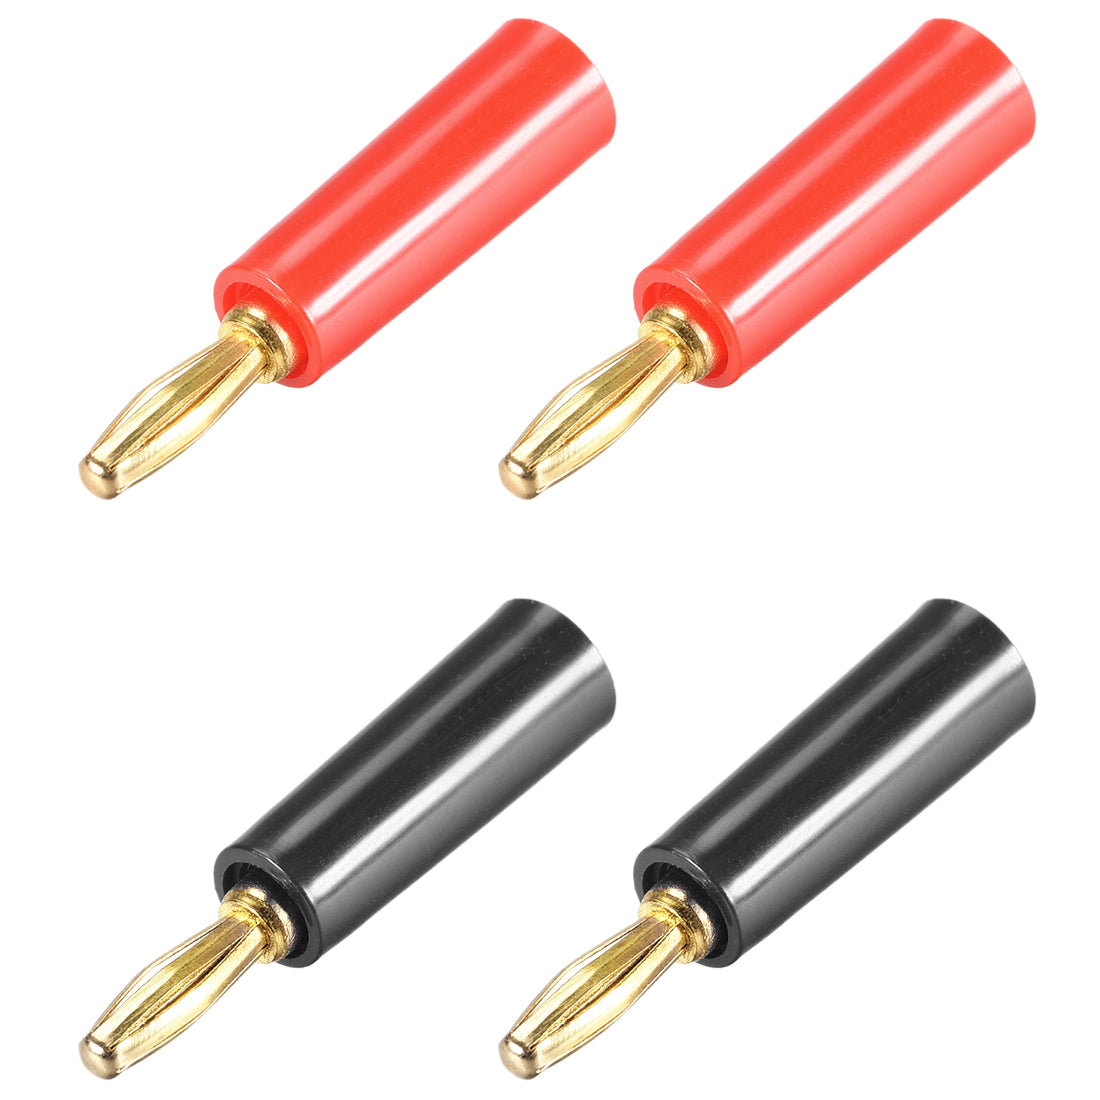 uxcell Uxcell 4mm Banana Speaker Plug Black Red  Cable Plugs Connectors Jack Connector 4pcs